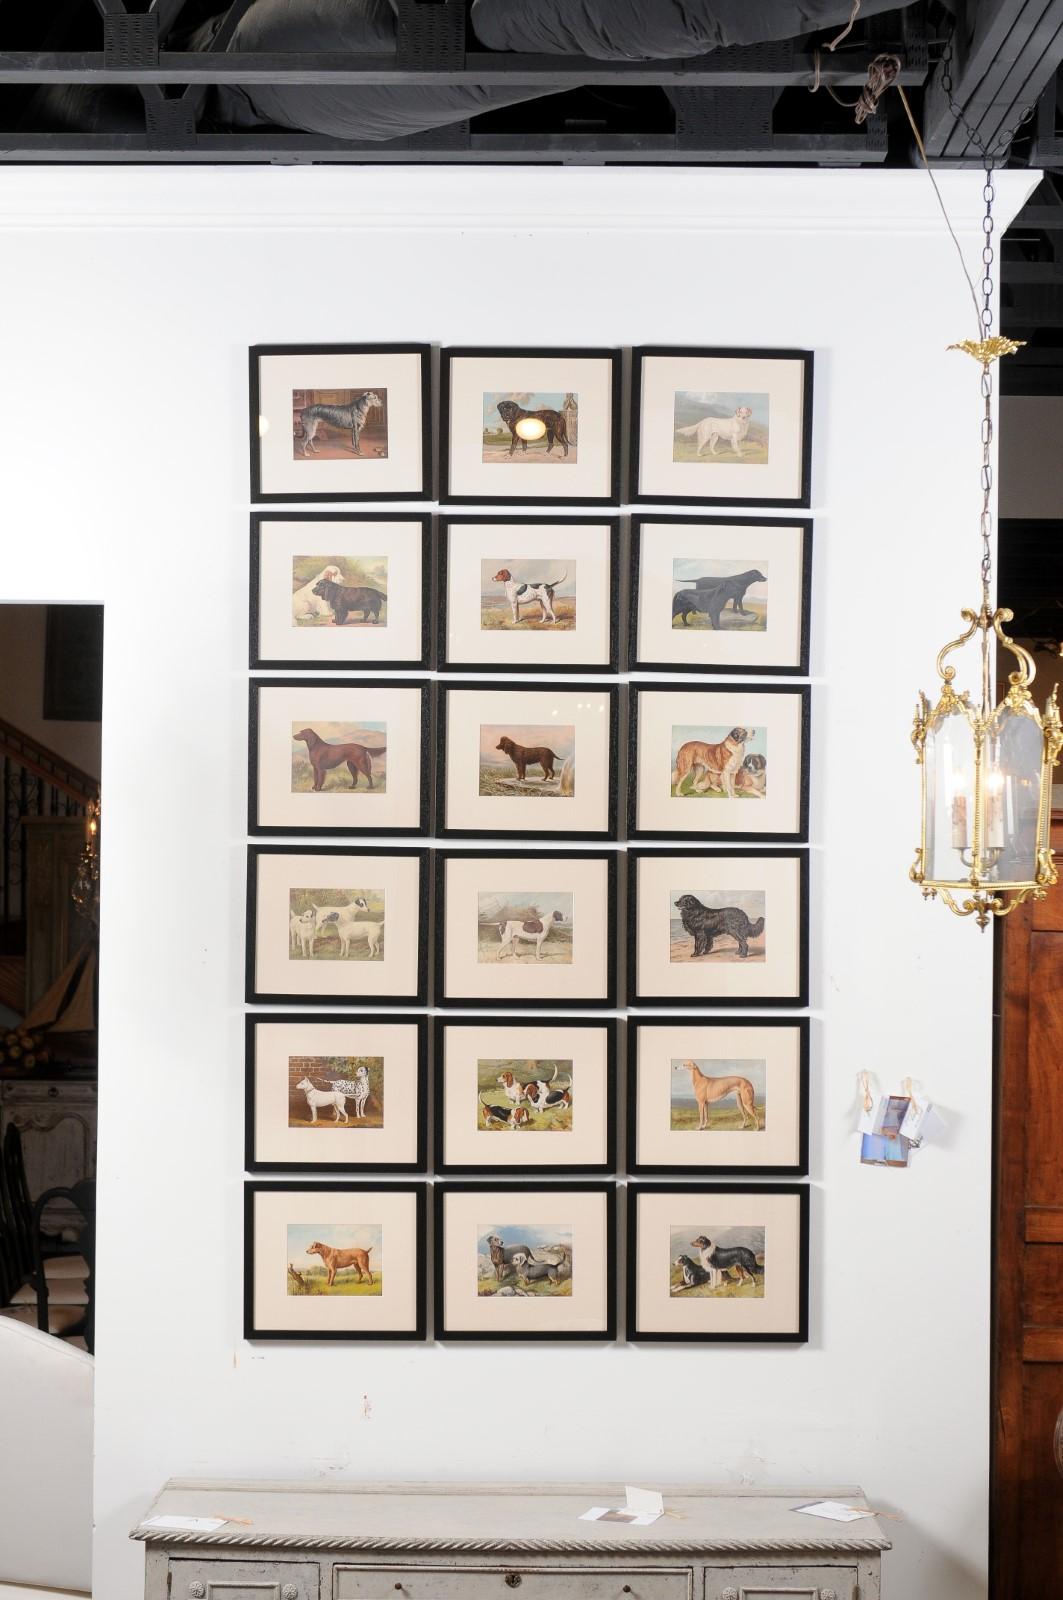 18 framed Cassell, Petter, Galpin & Co chromolithograph dog prints from the 20th century, priced and sold $495 each. Created in England, the plates were made for The Illustrated Book of the Dog by Vero Shaw, the fourth book on dogs to be printed in